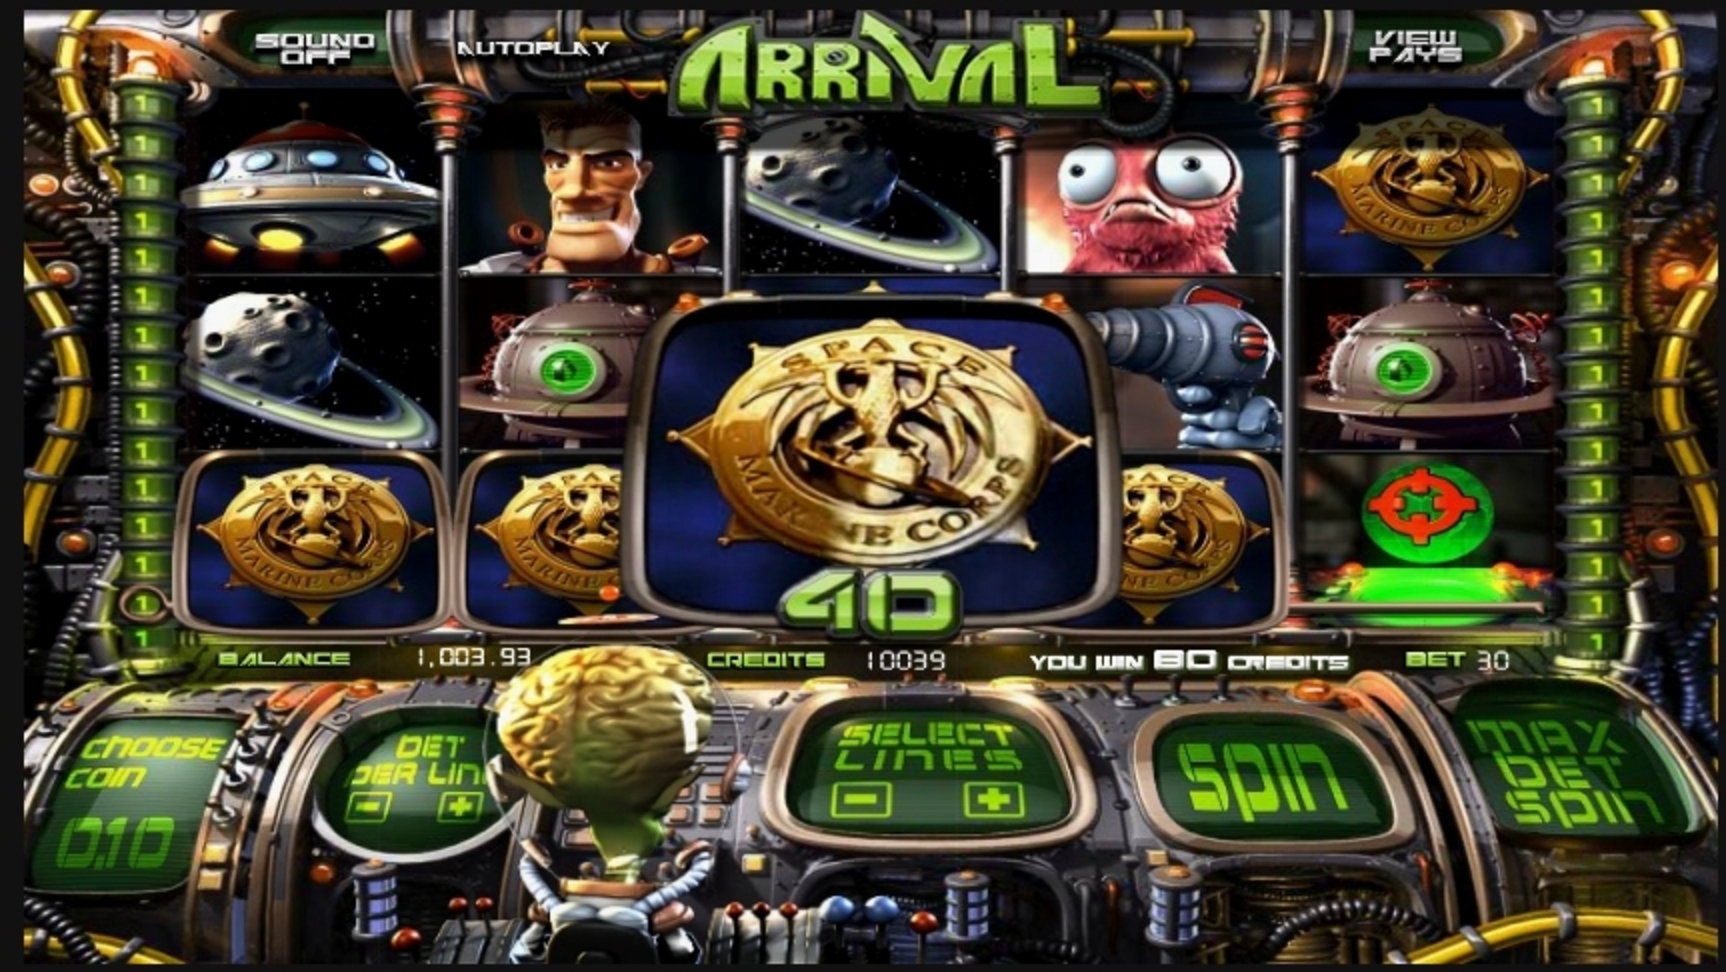 Win Money in Arrival Free Slot Game by Betsoft